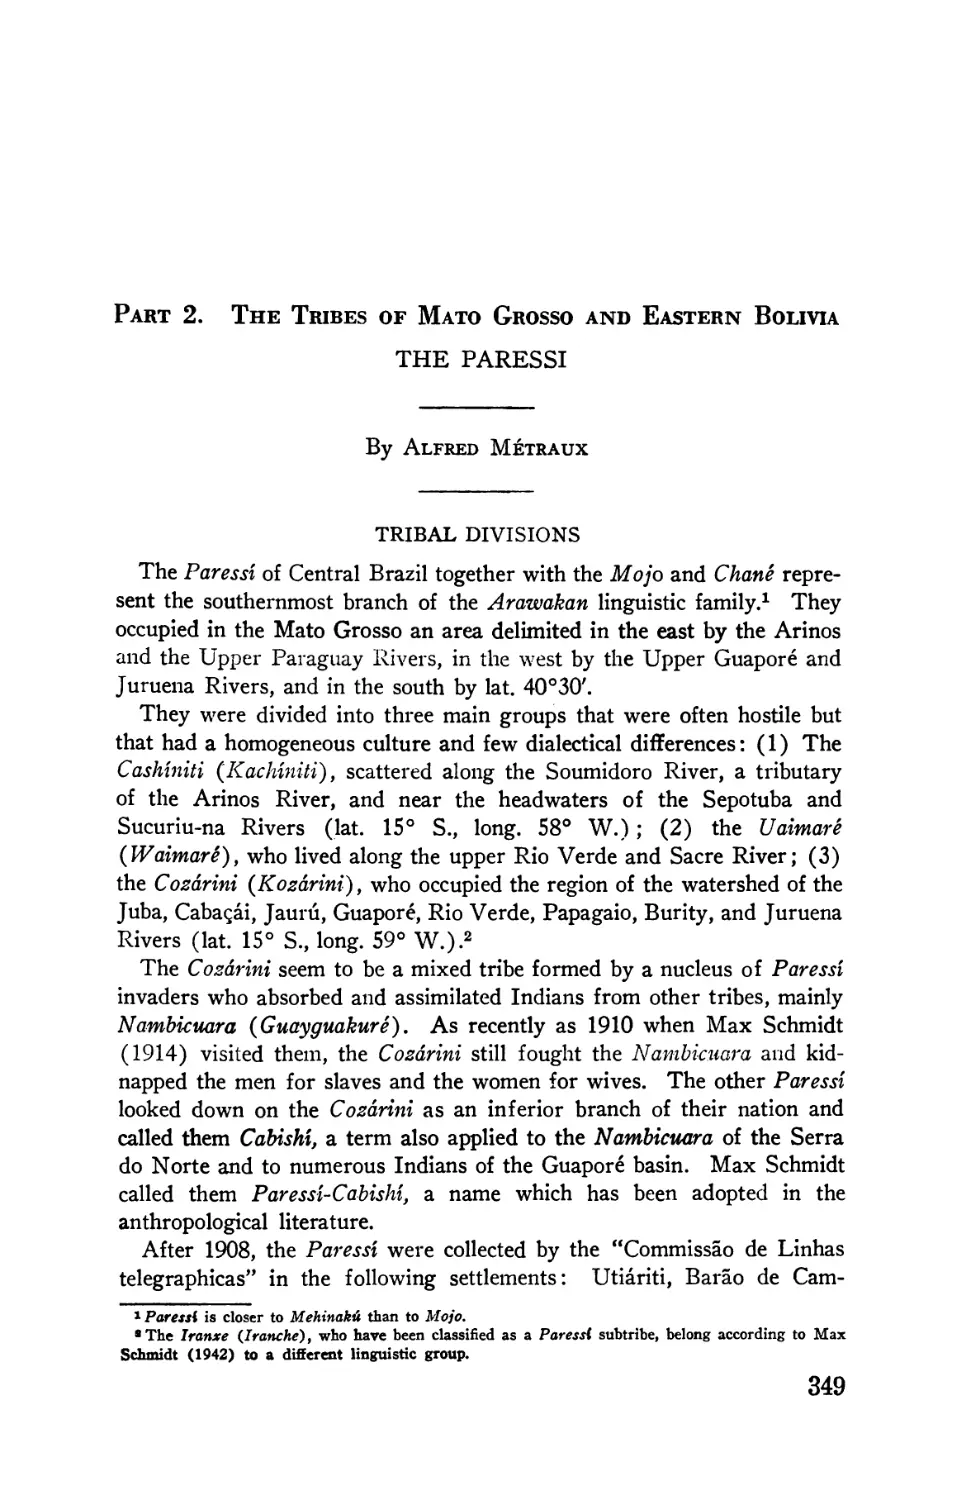 Part 2. The tribes of Mato Grosso and eastern Bolivia